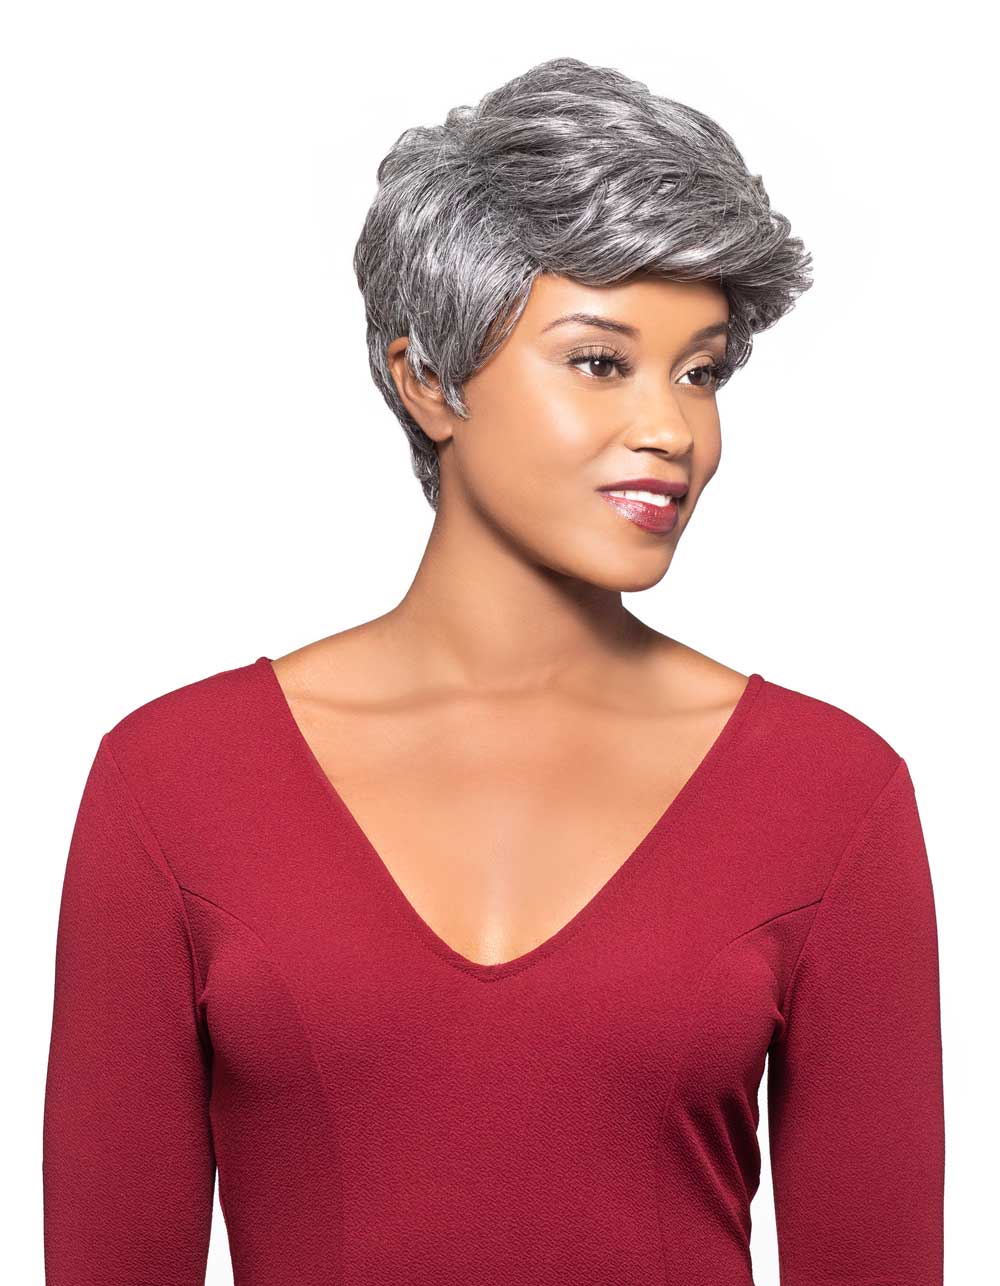 Alicia FOXY SILVER H/H MILLY  WIG - 13996